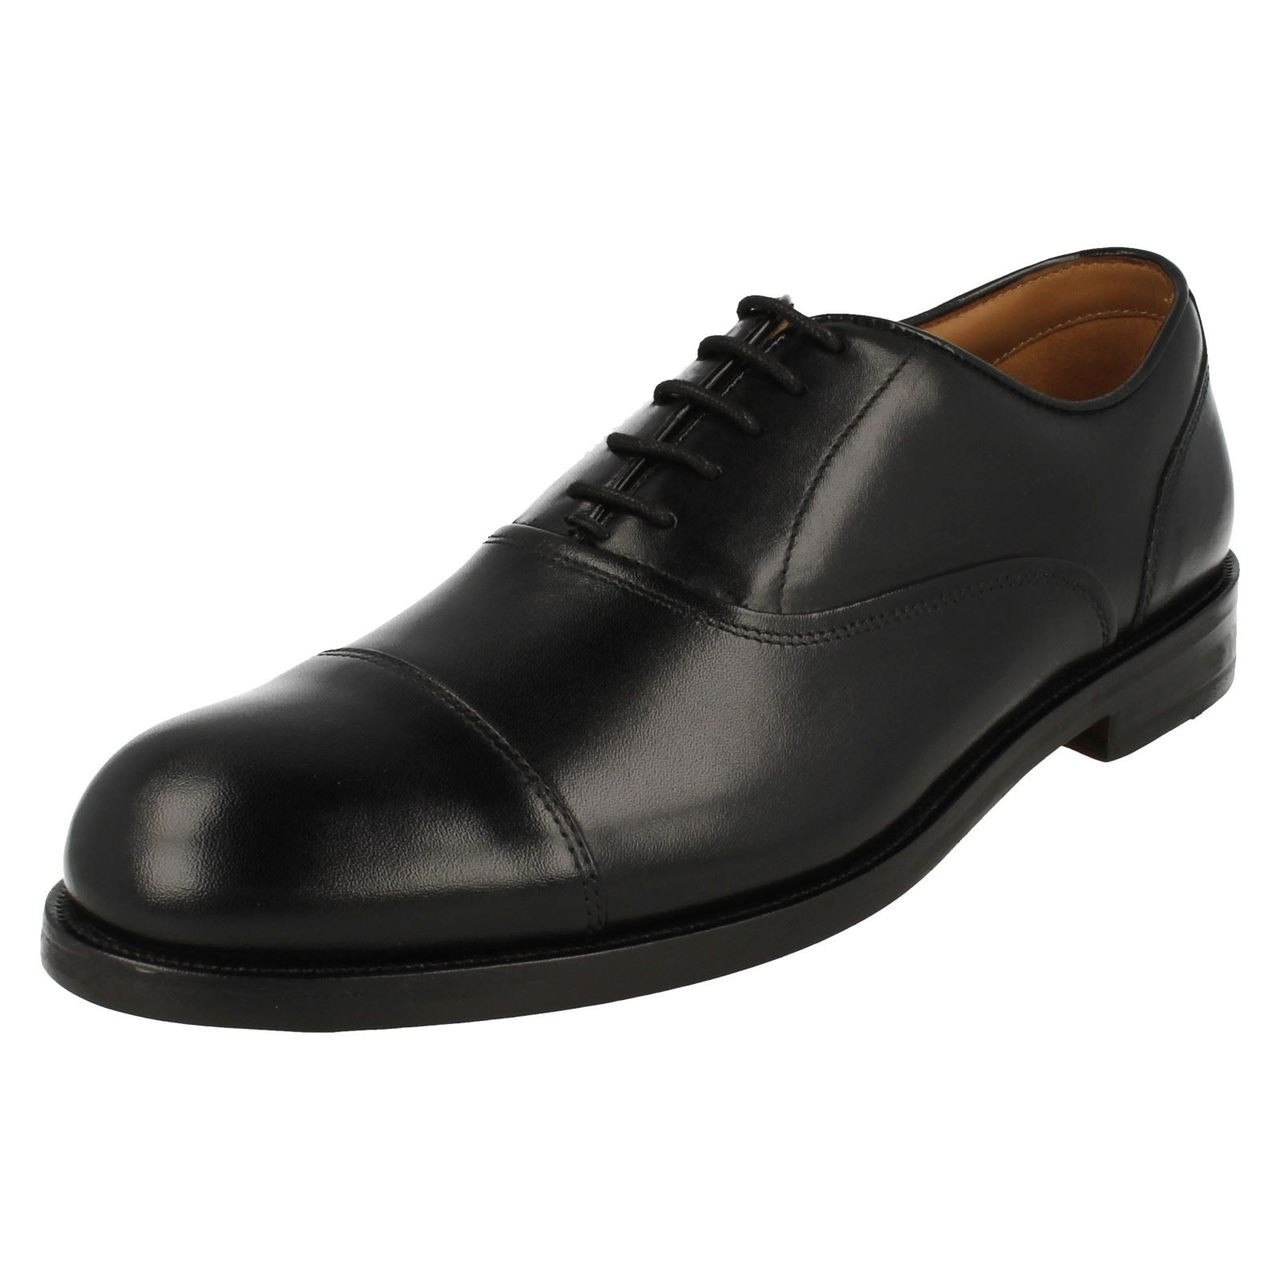 Mens Clarks Formal Style Shoes Coling Boss